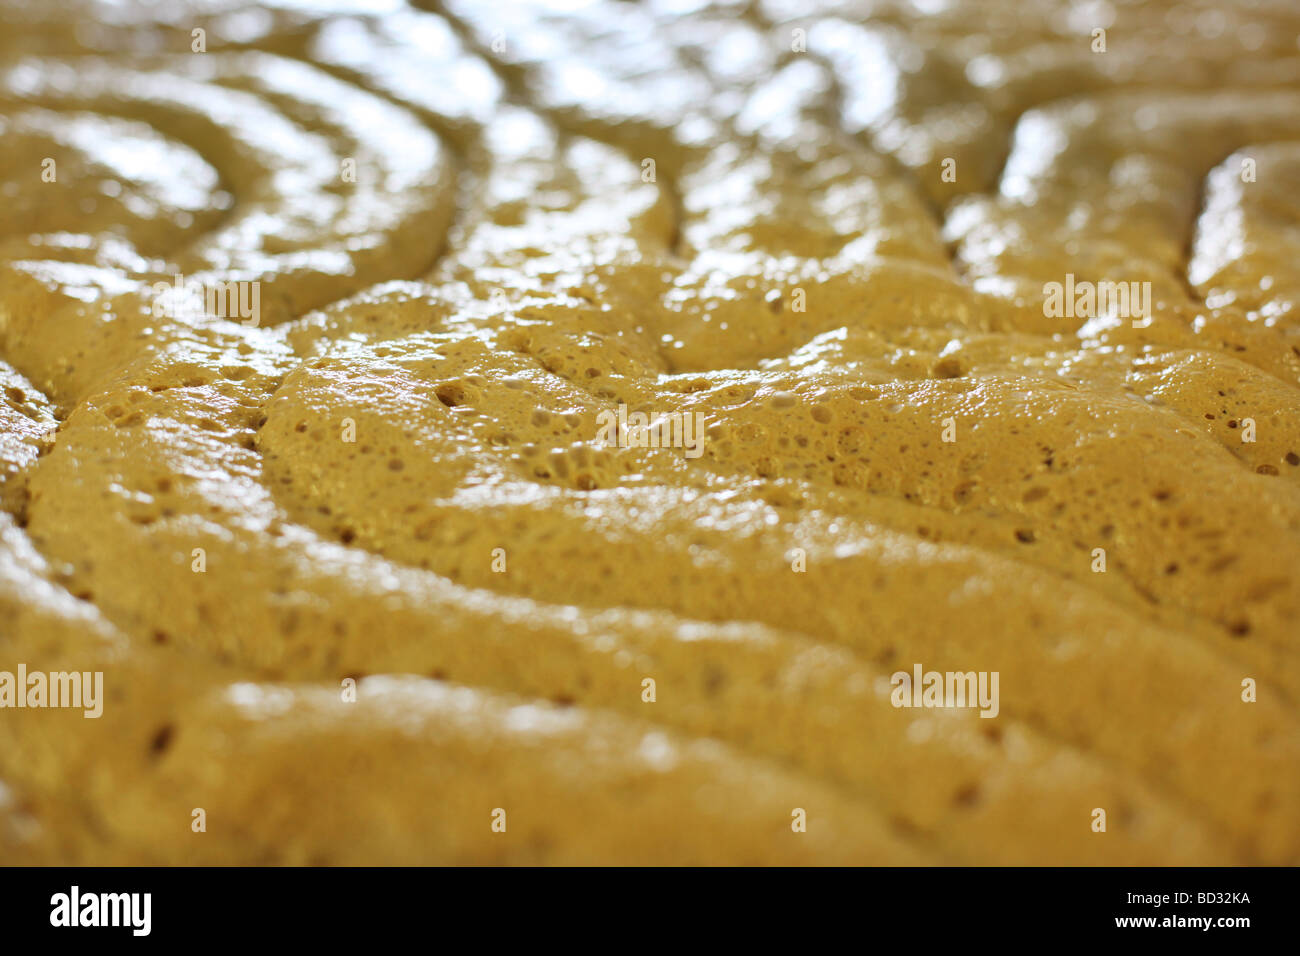 The yeast brewing on a vat of beer Stock Photo